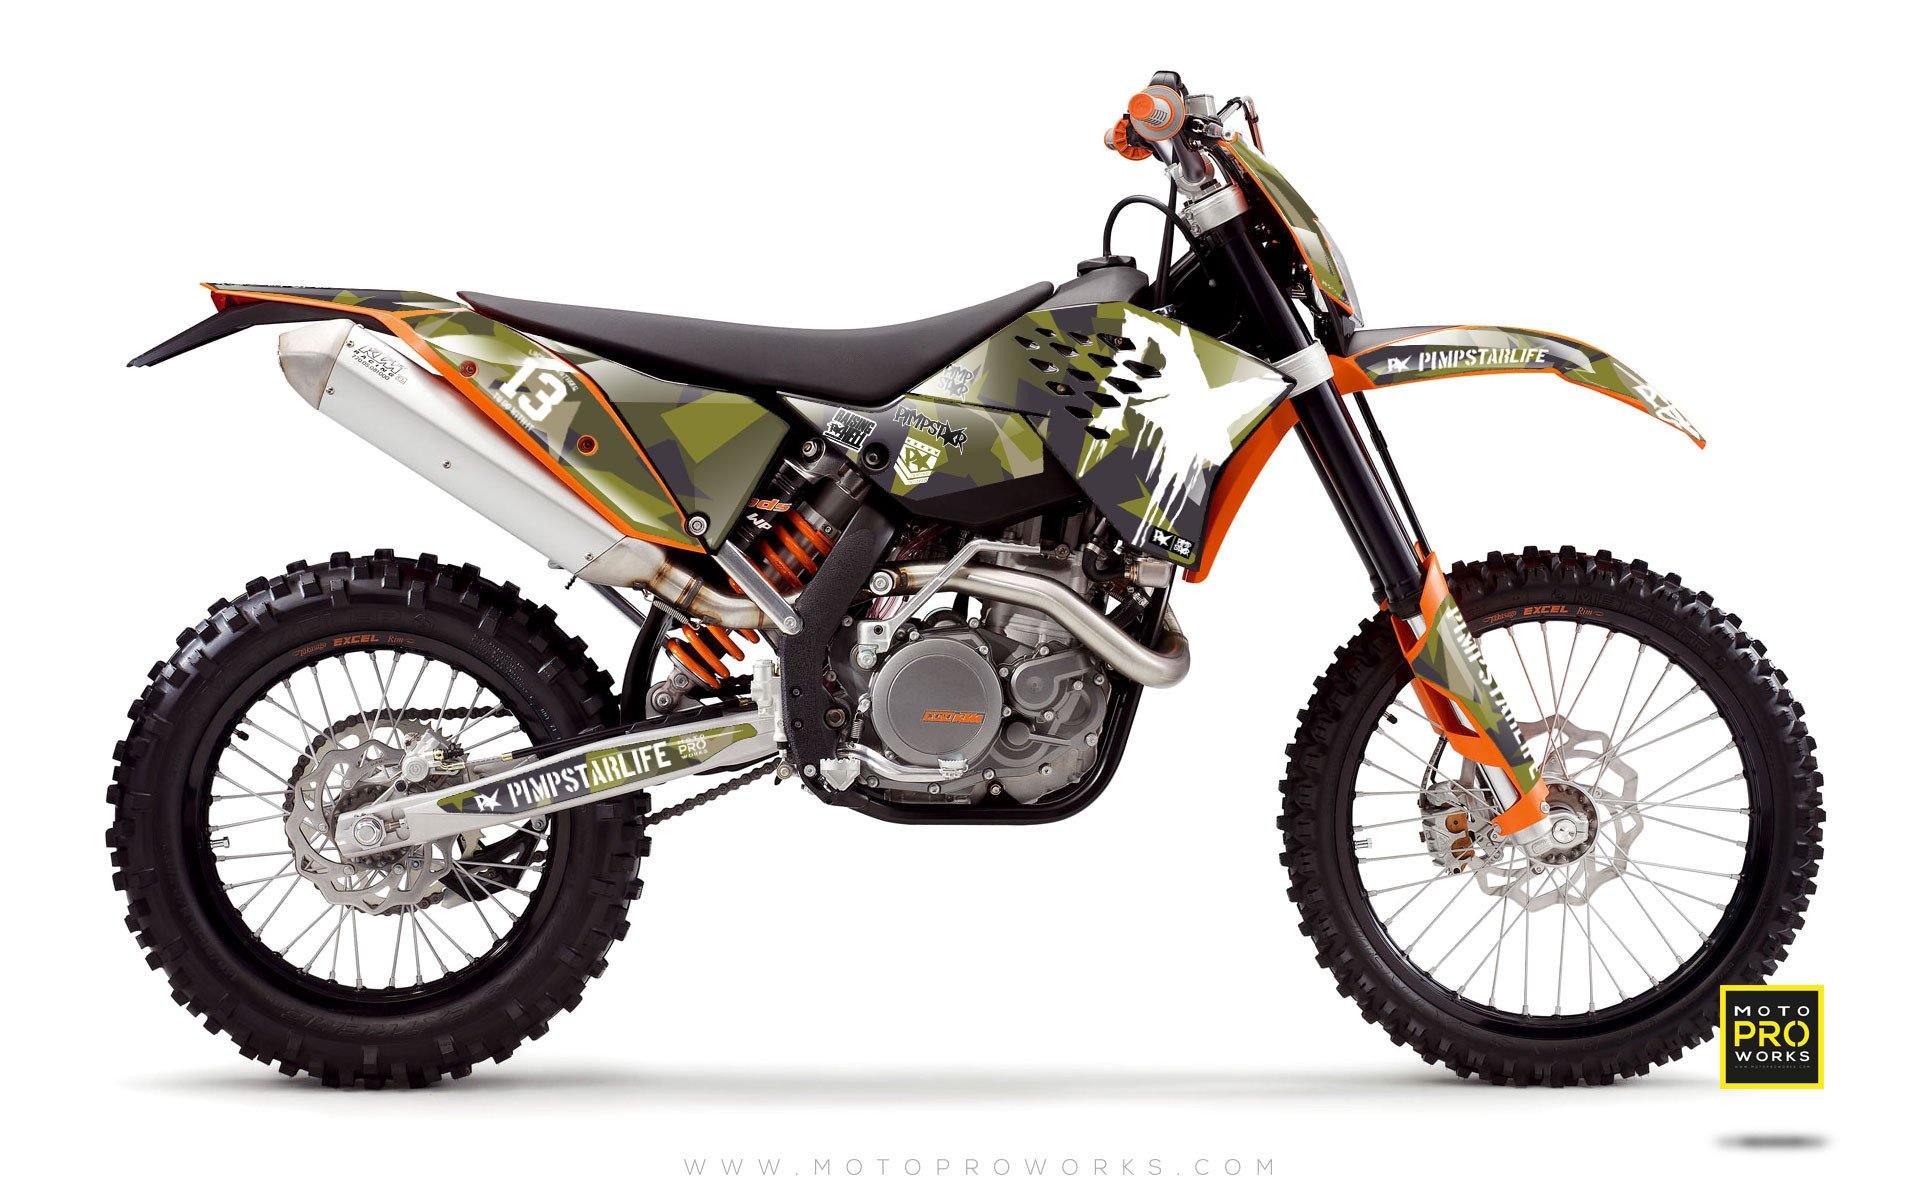 KTM GRAPHIC KIT - "M90" (m90) - MotoProWorks | Decals and Bike Graphic kit